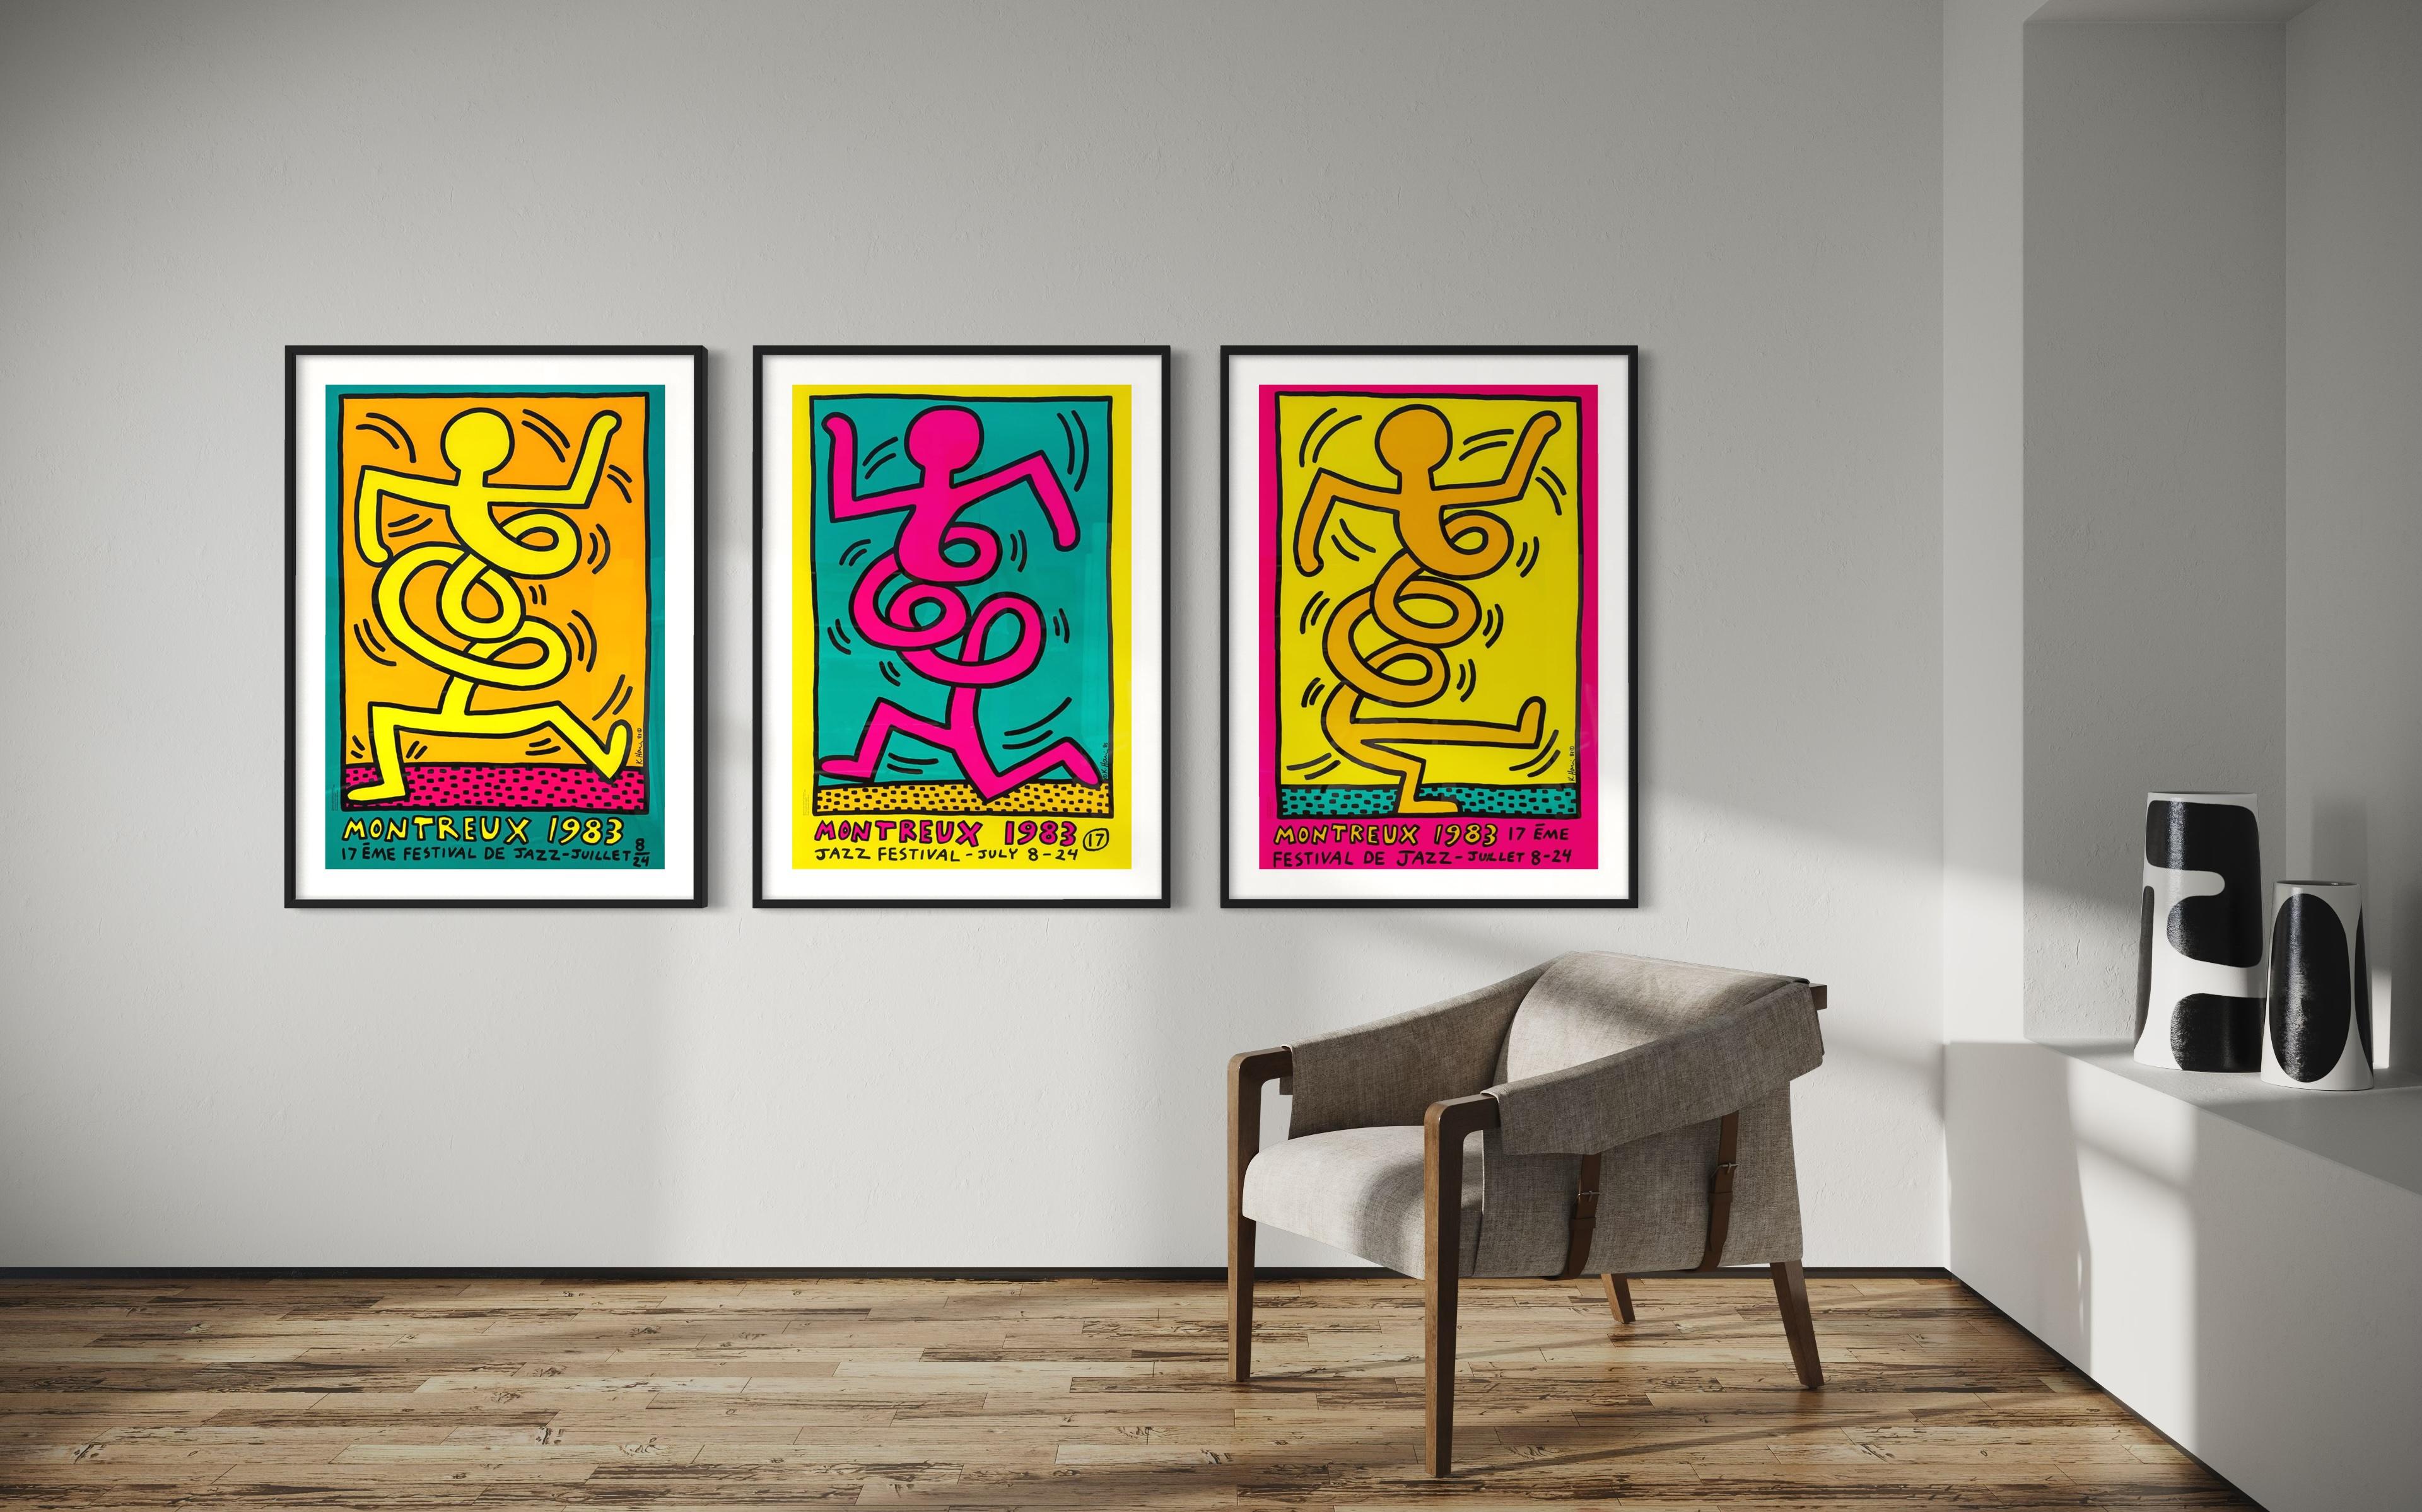 Montreux Jazz De Festival (Complete Set) - Print by Keith Haring